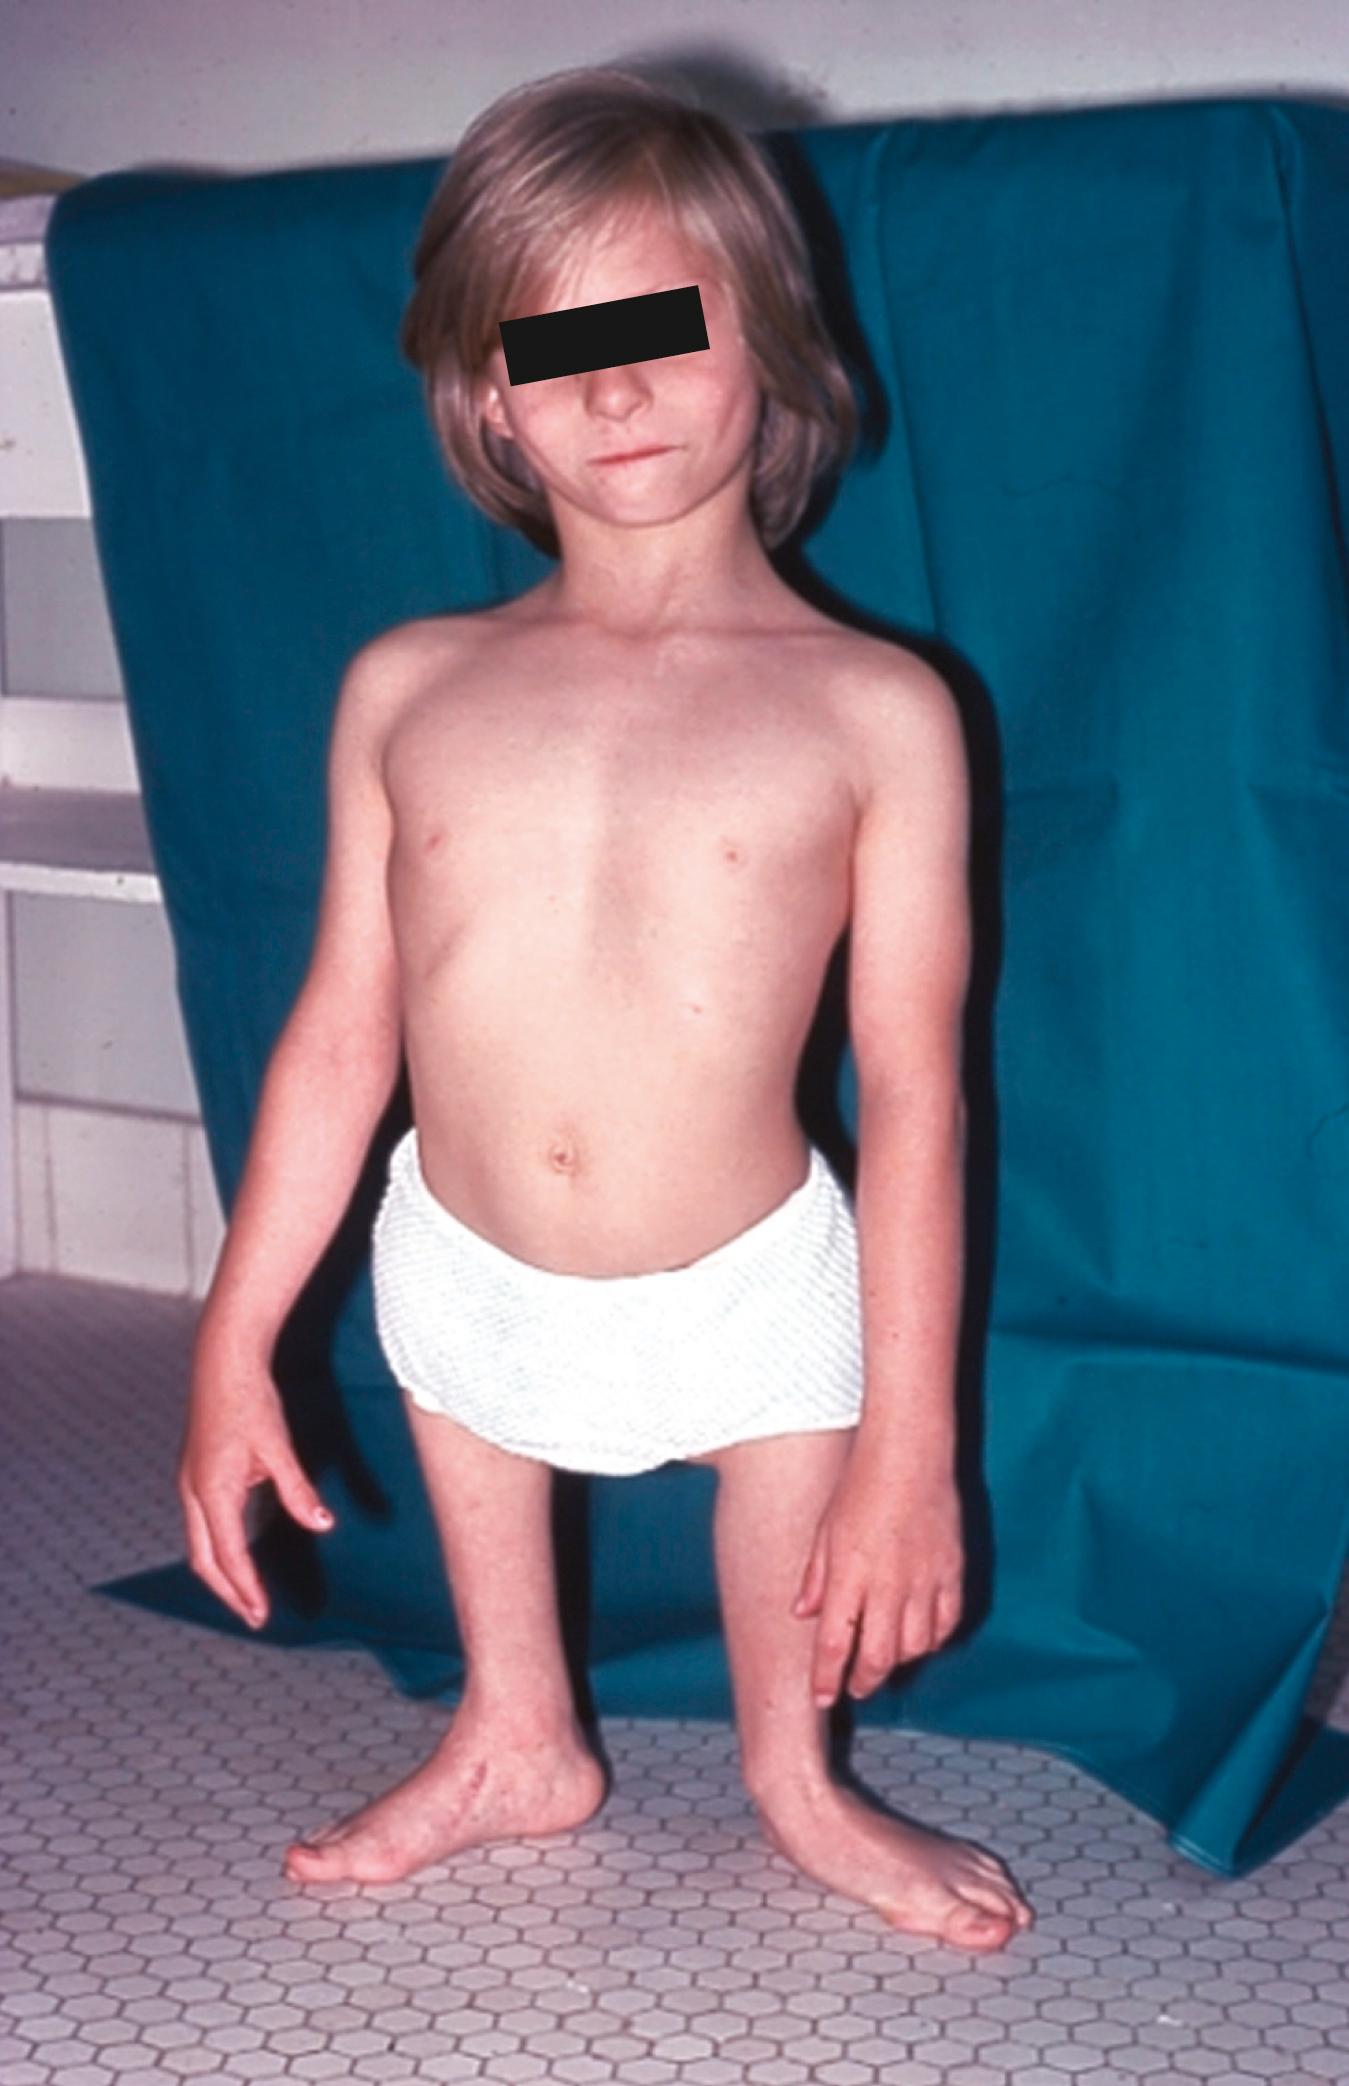 Fig. 21.19, Girl with bilateral femoral deficiency. Prostheses to increase her height are the only appropriate treatment measure.